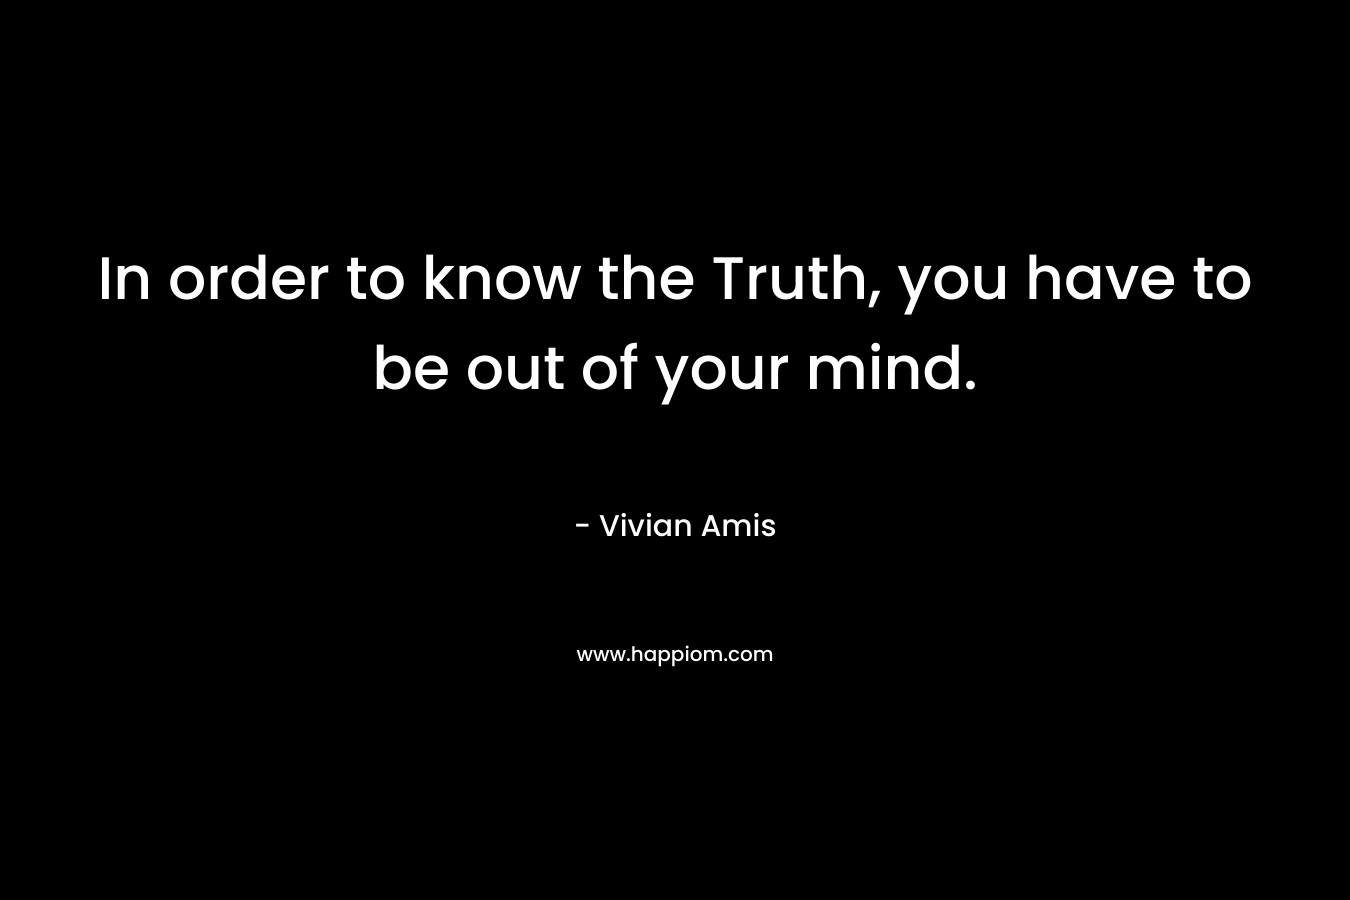 In order to know the Truth, you have to be out of your mind.